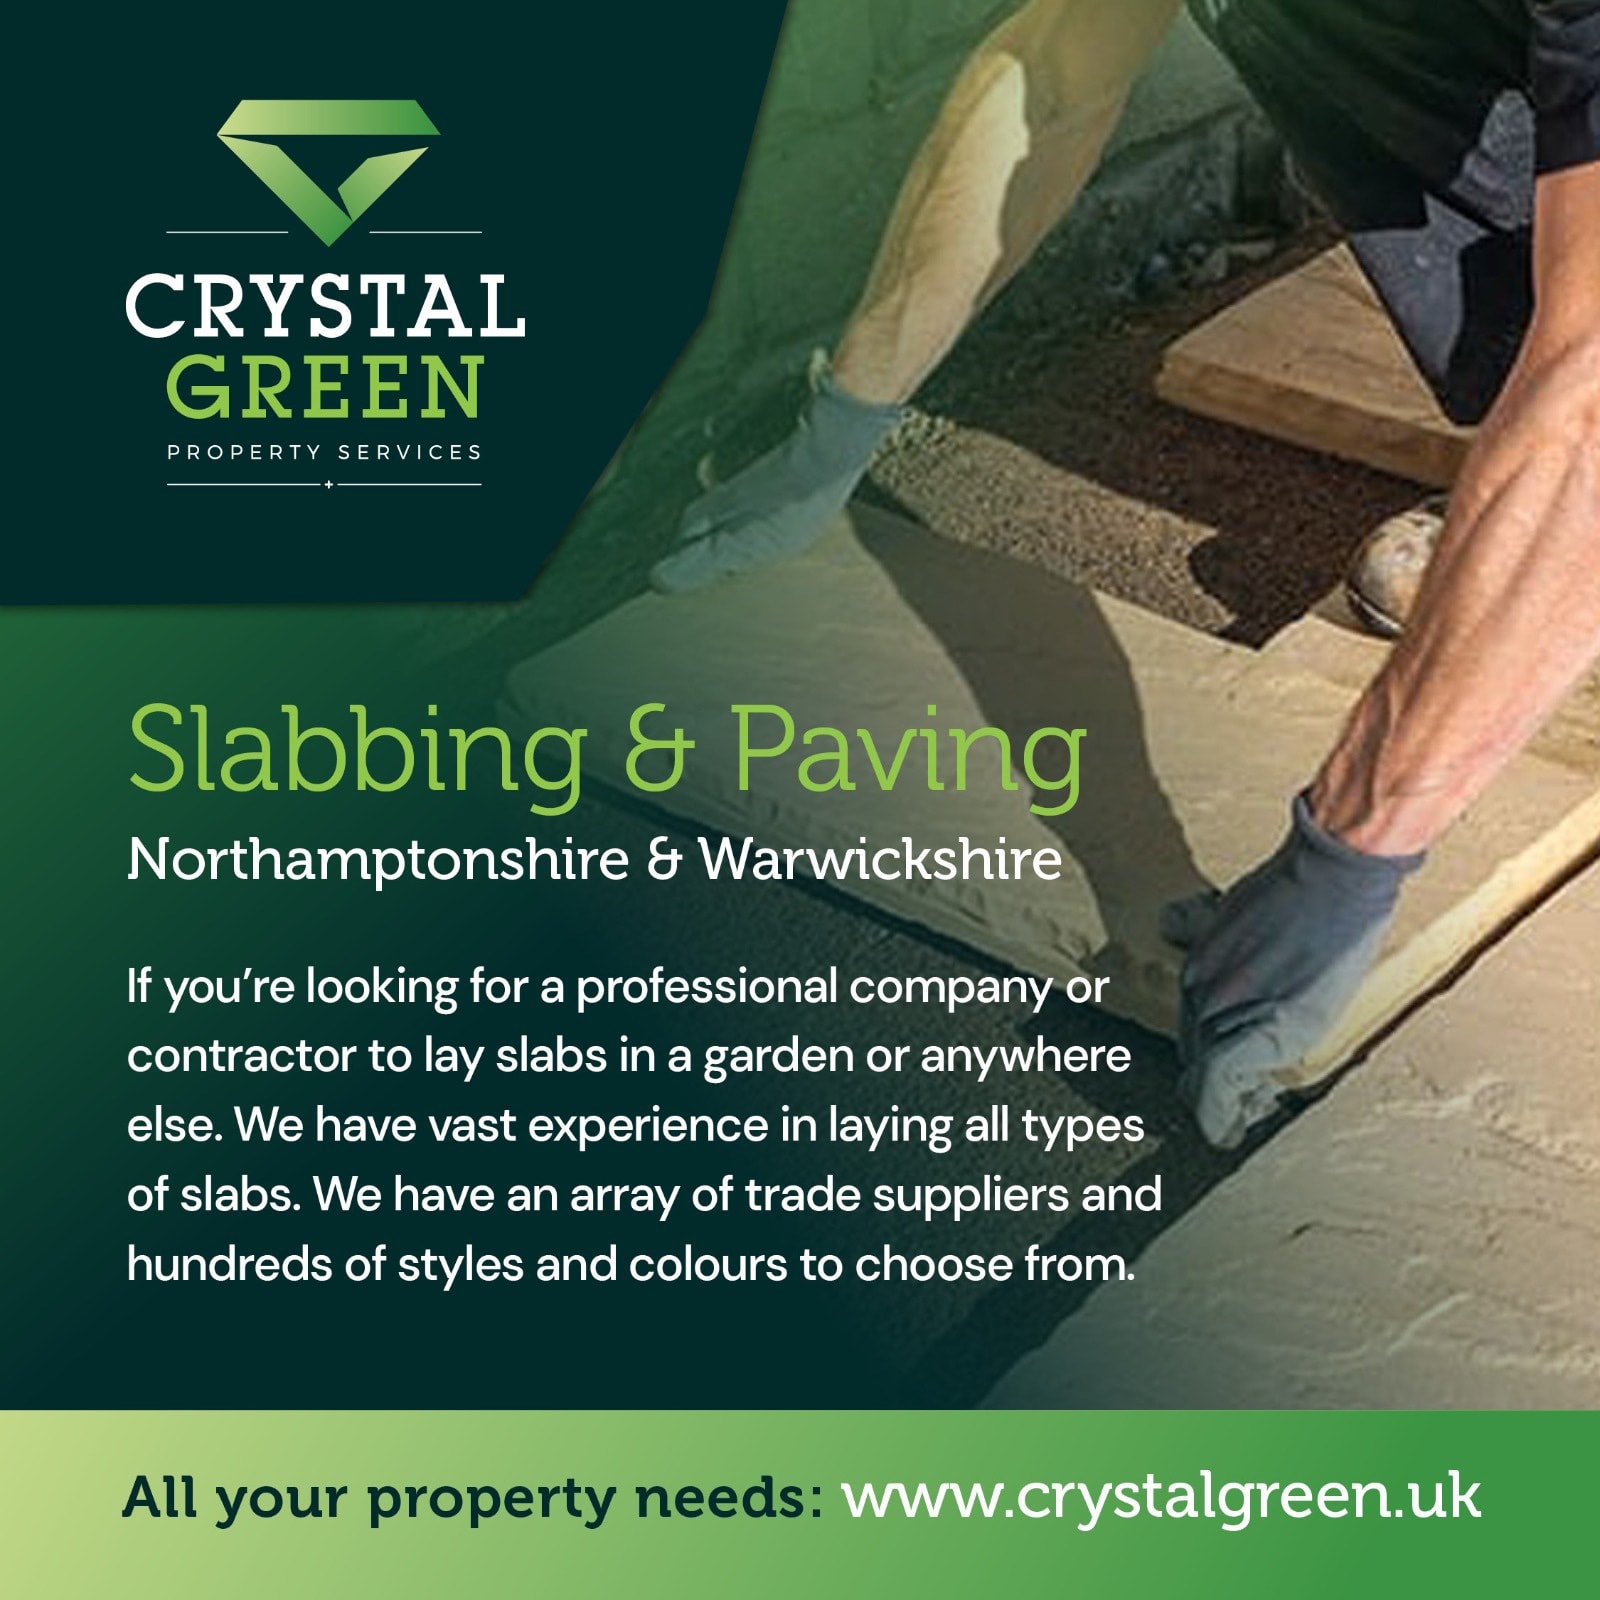 Crystal Green Property Services Ltd Daventry 07512 851560